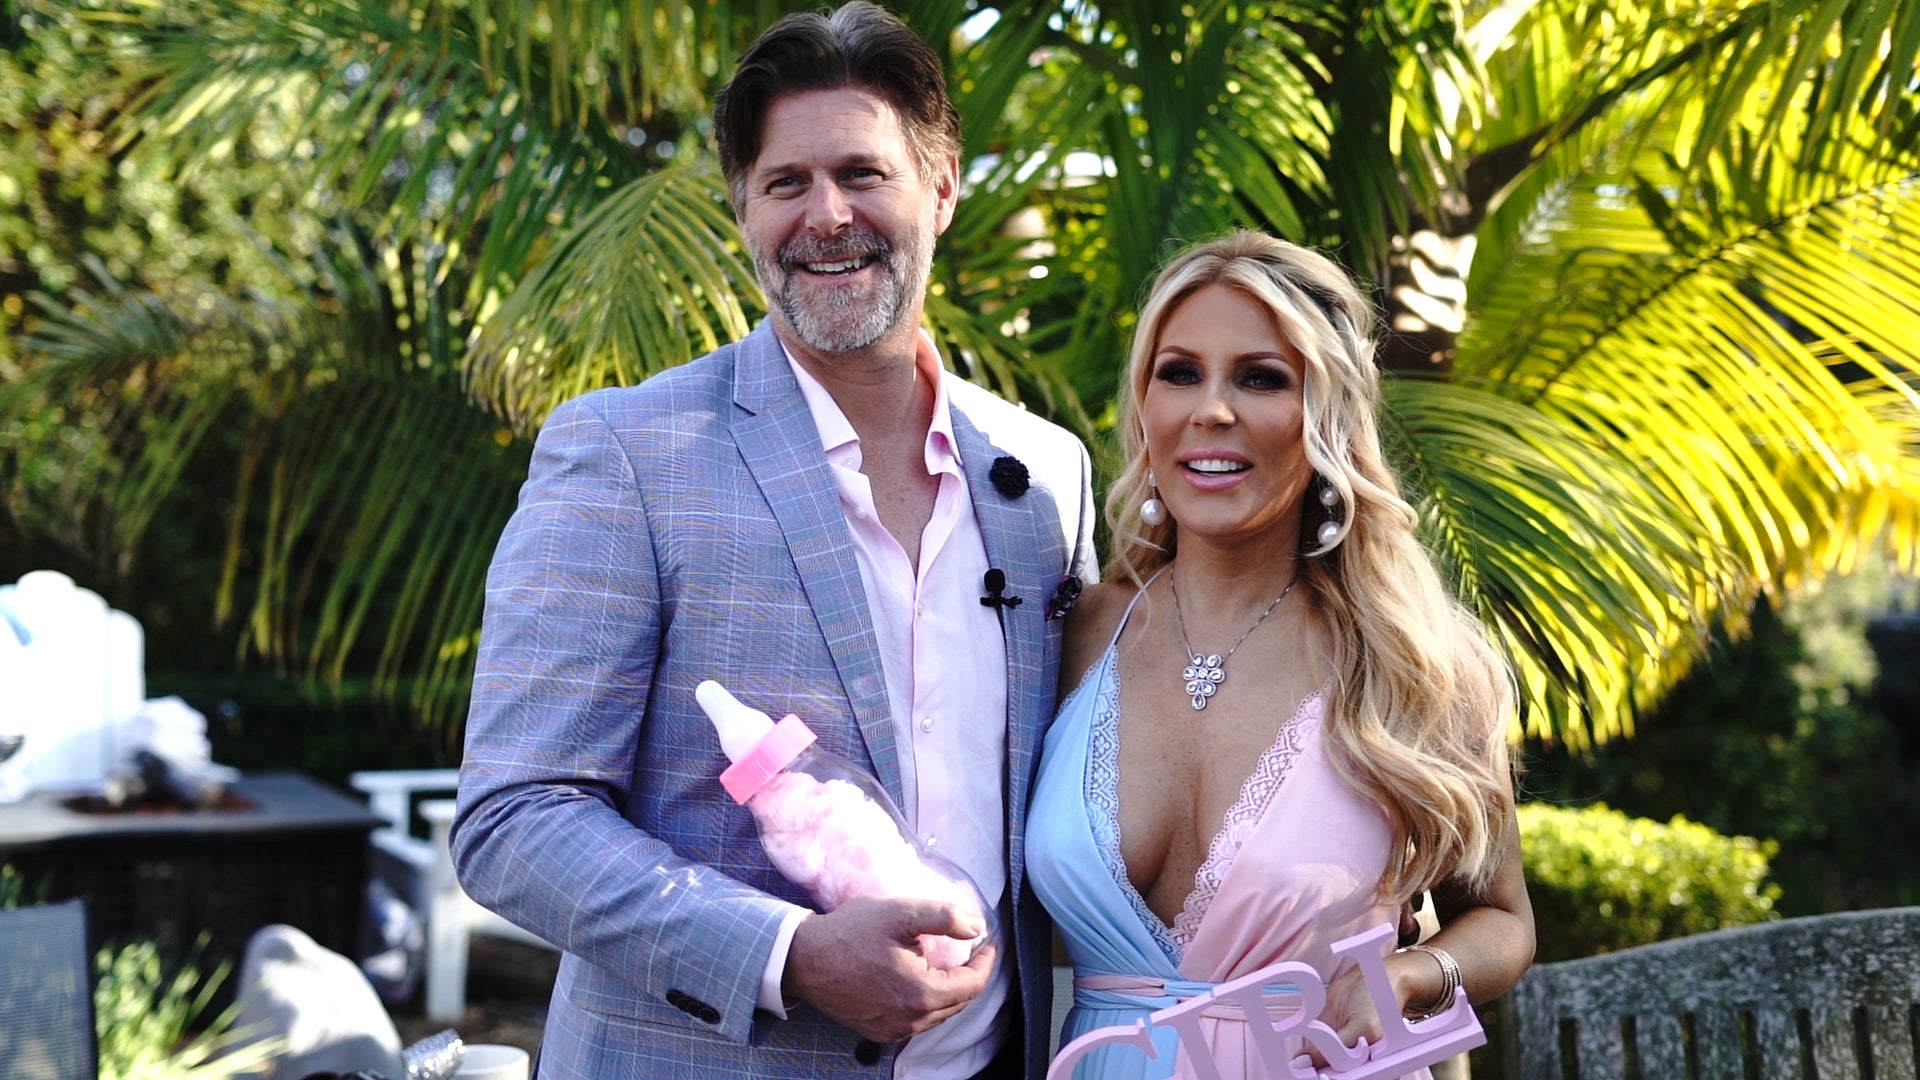 Gretchen Rossi and Slade Smiley Cant Believe Theyre Having a Girl! Watch the Reveal (Exclusive) Entertainment Tonight pic